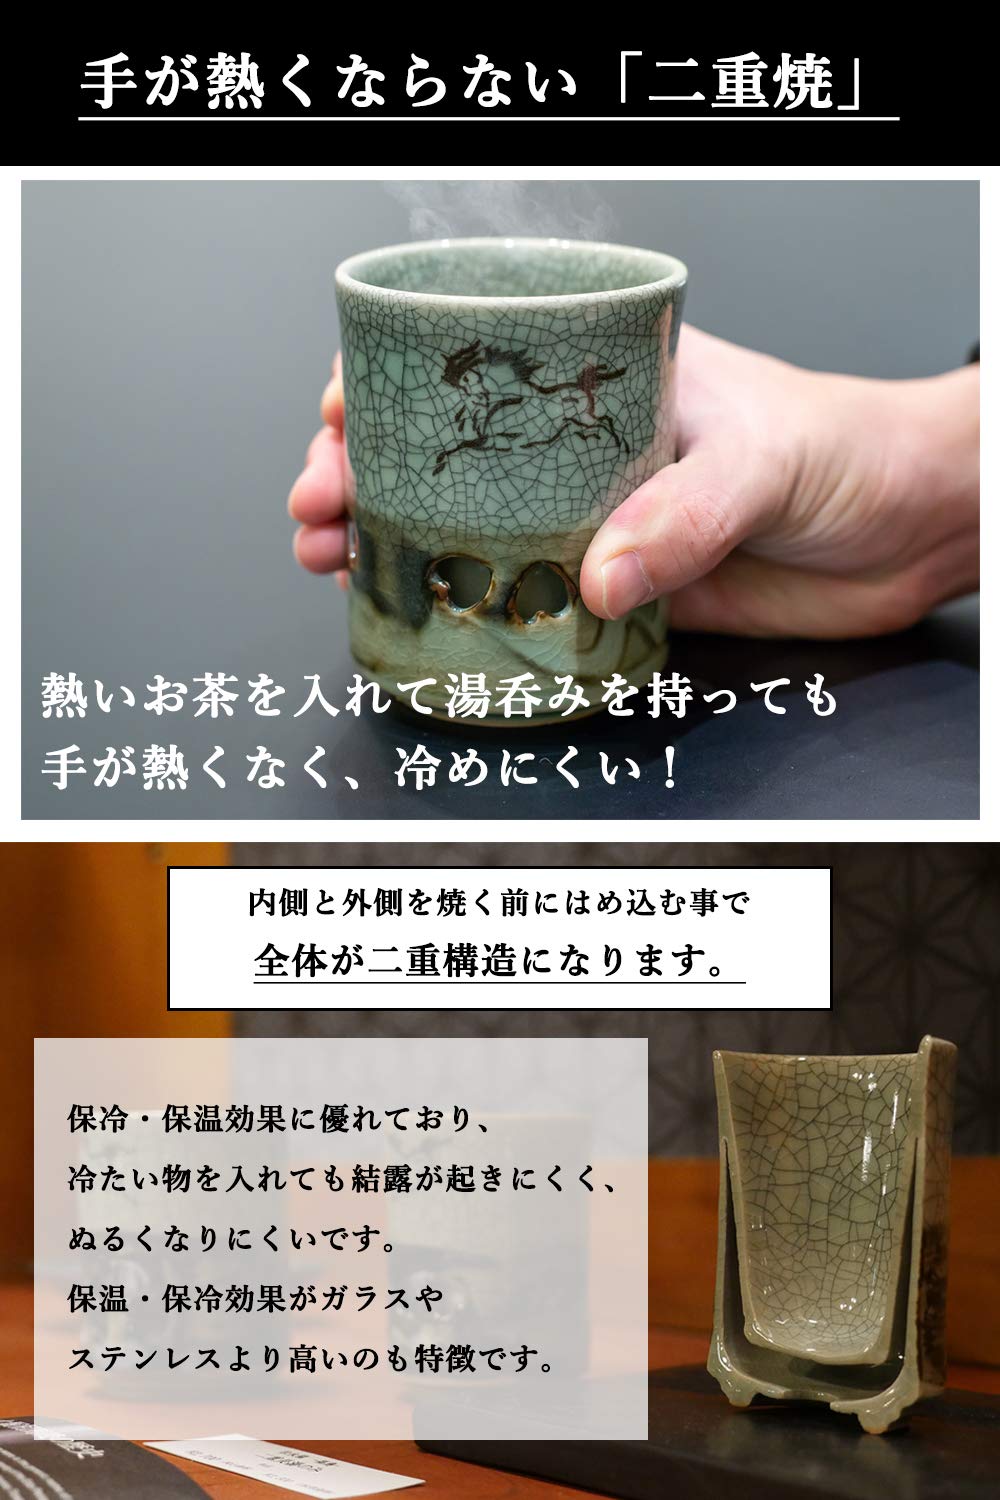 Hand-made: Double layer teacup | “Soma-Yaki” | Blue Crack Pattern | Made in Japan |